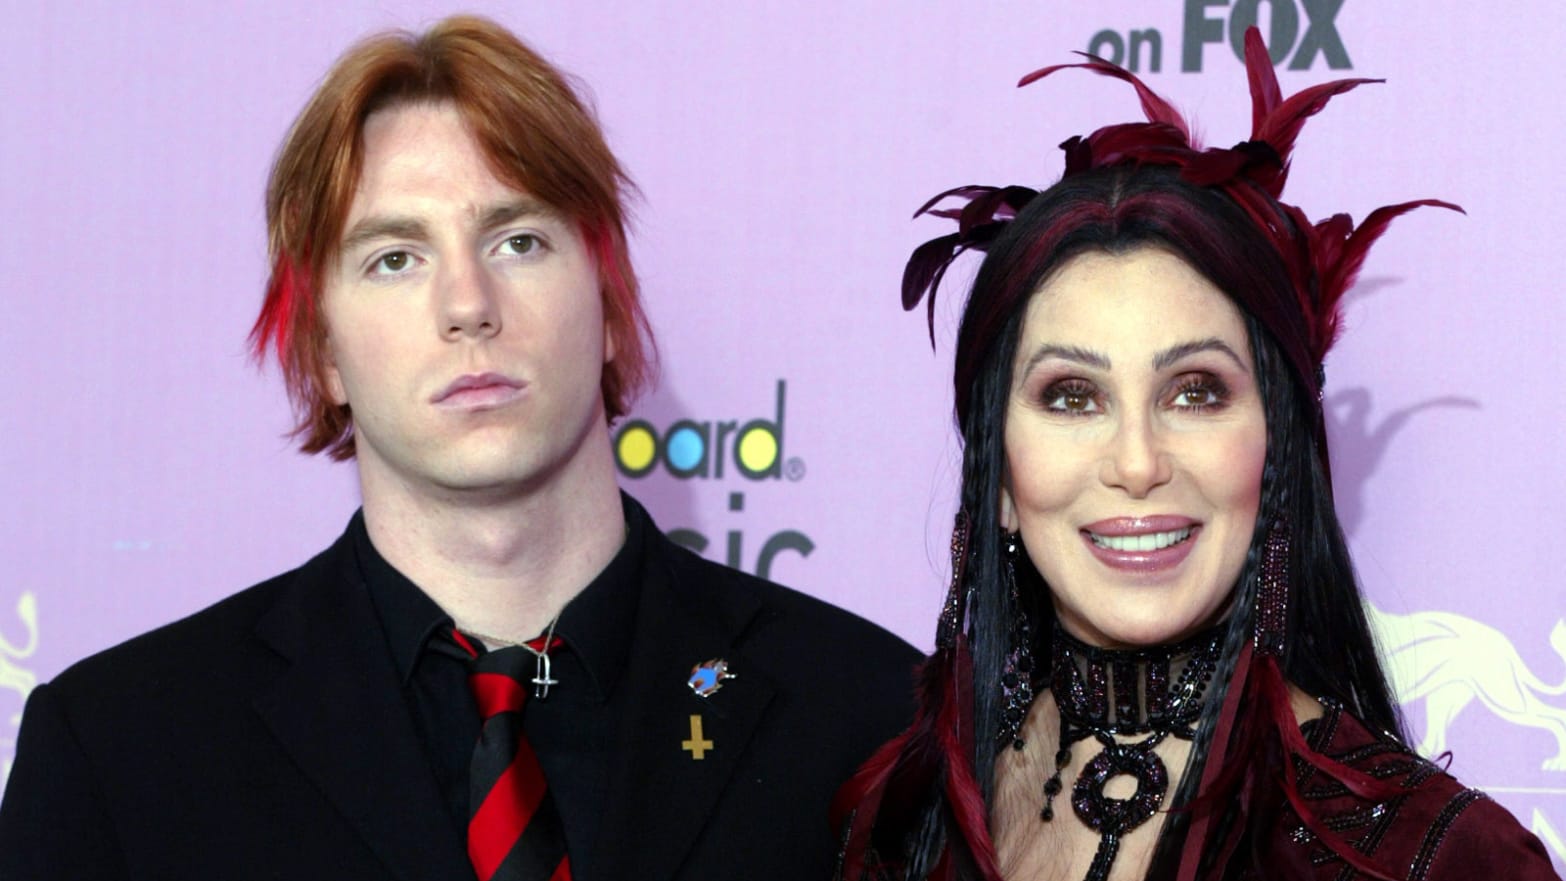 Cher poses with her son, Elijah Blue, at the MGM Grand Garden Arena in Las Vegas, Nevada December 9, 2002